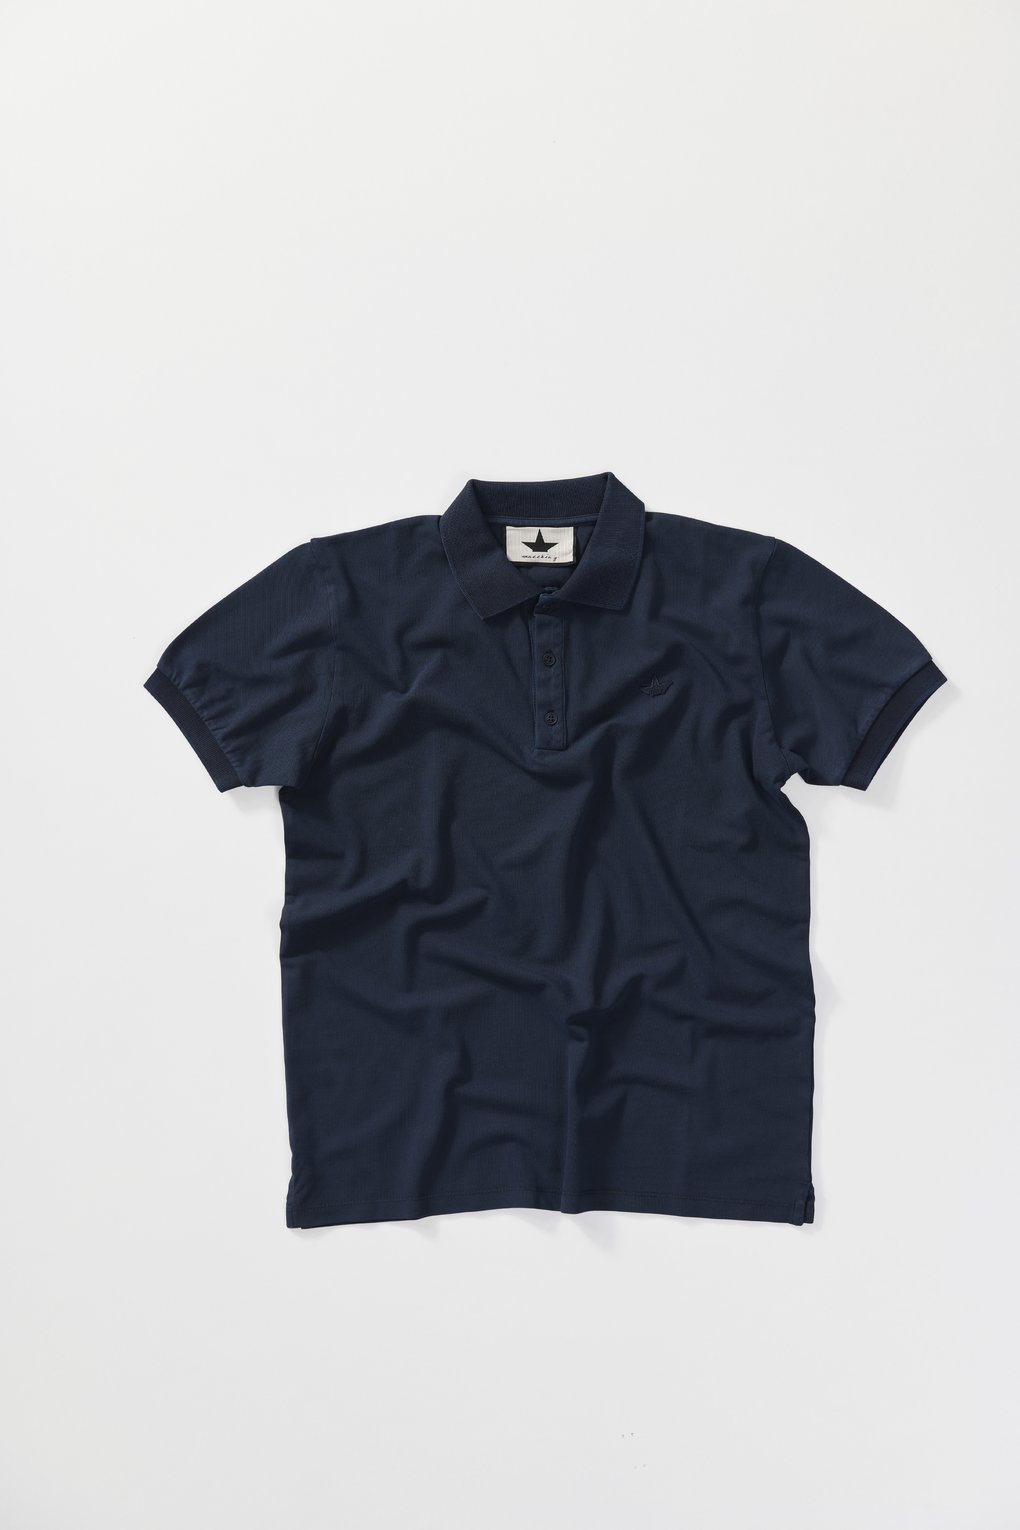 T-shirt Polo in cotton piquet, stone washed - Navy Blue